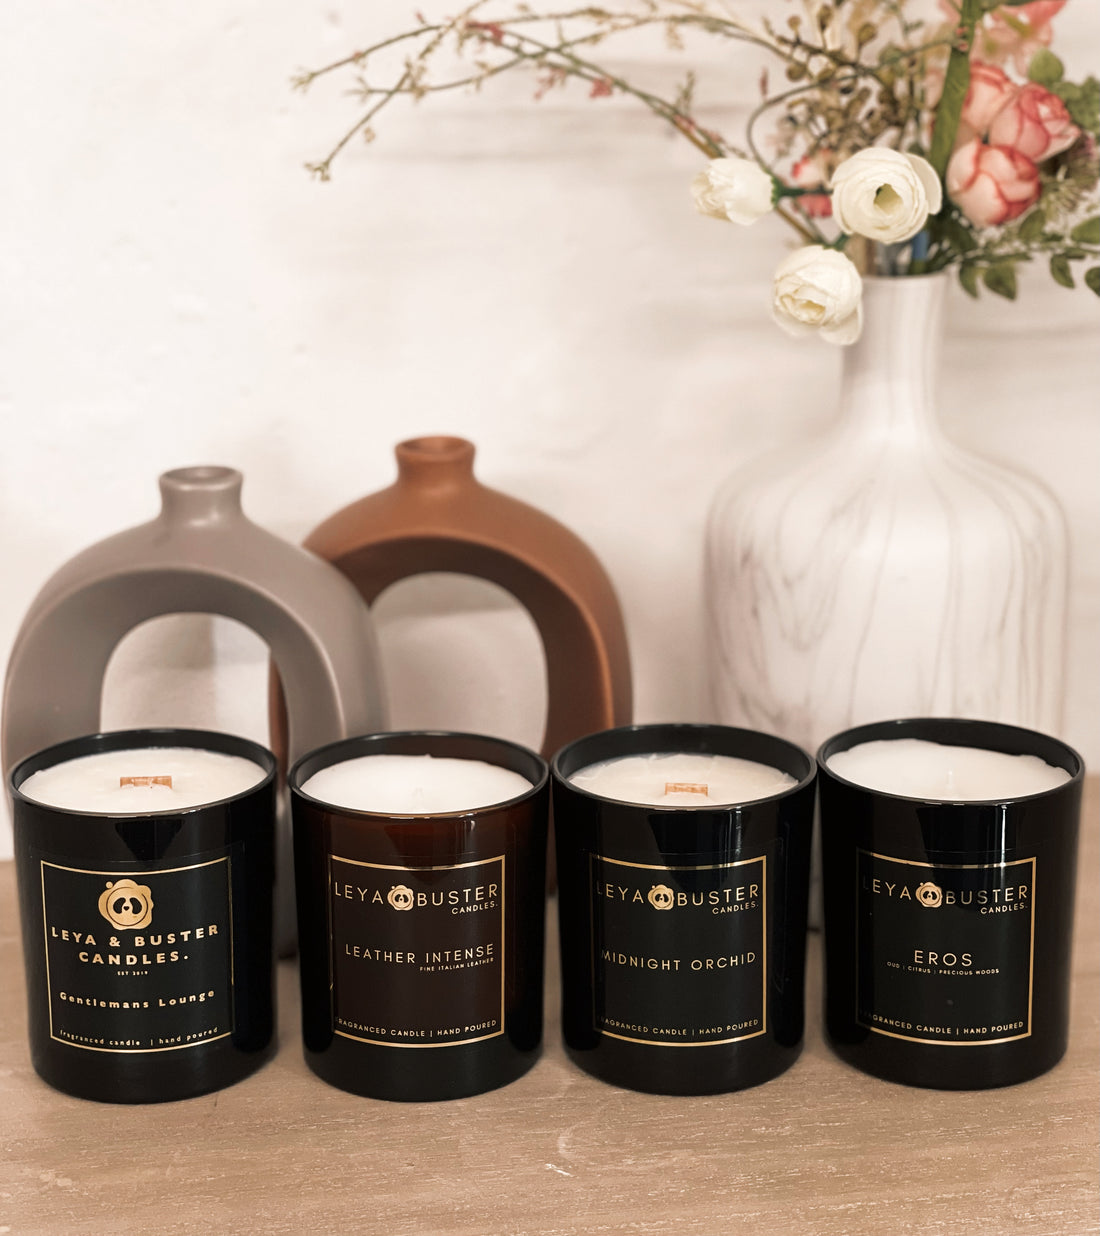 Who are Leya & Buster Candles?